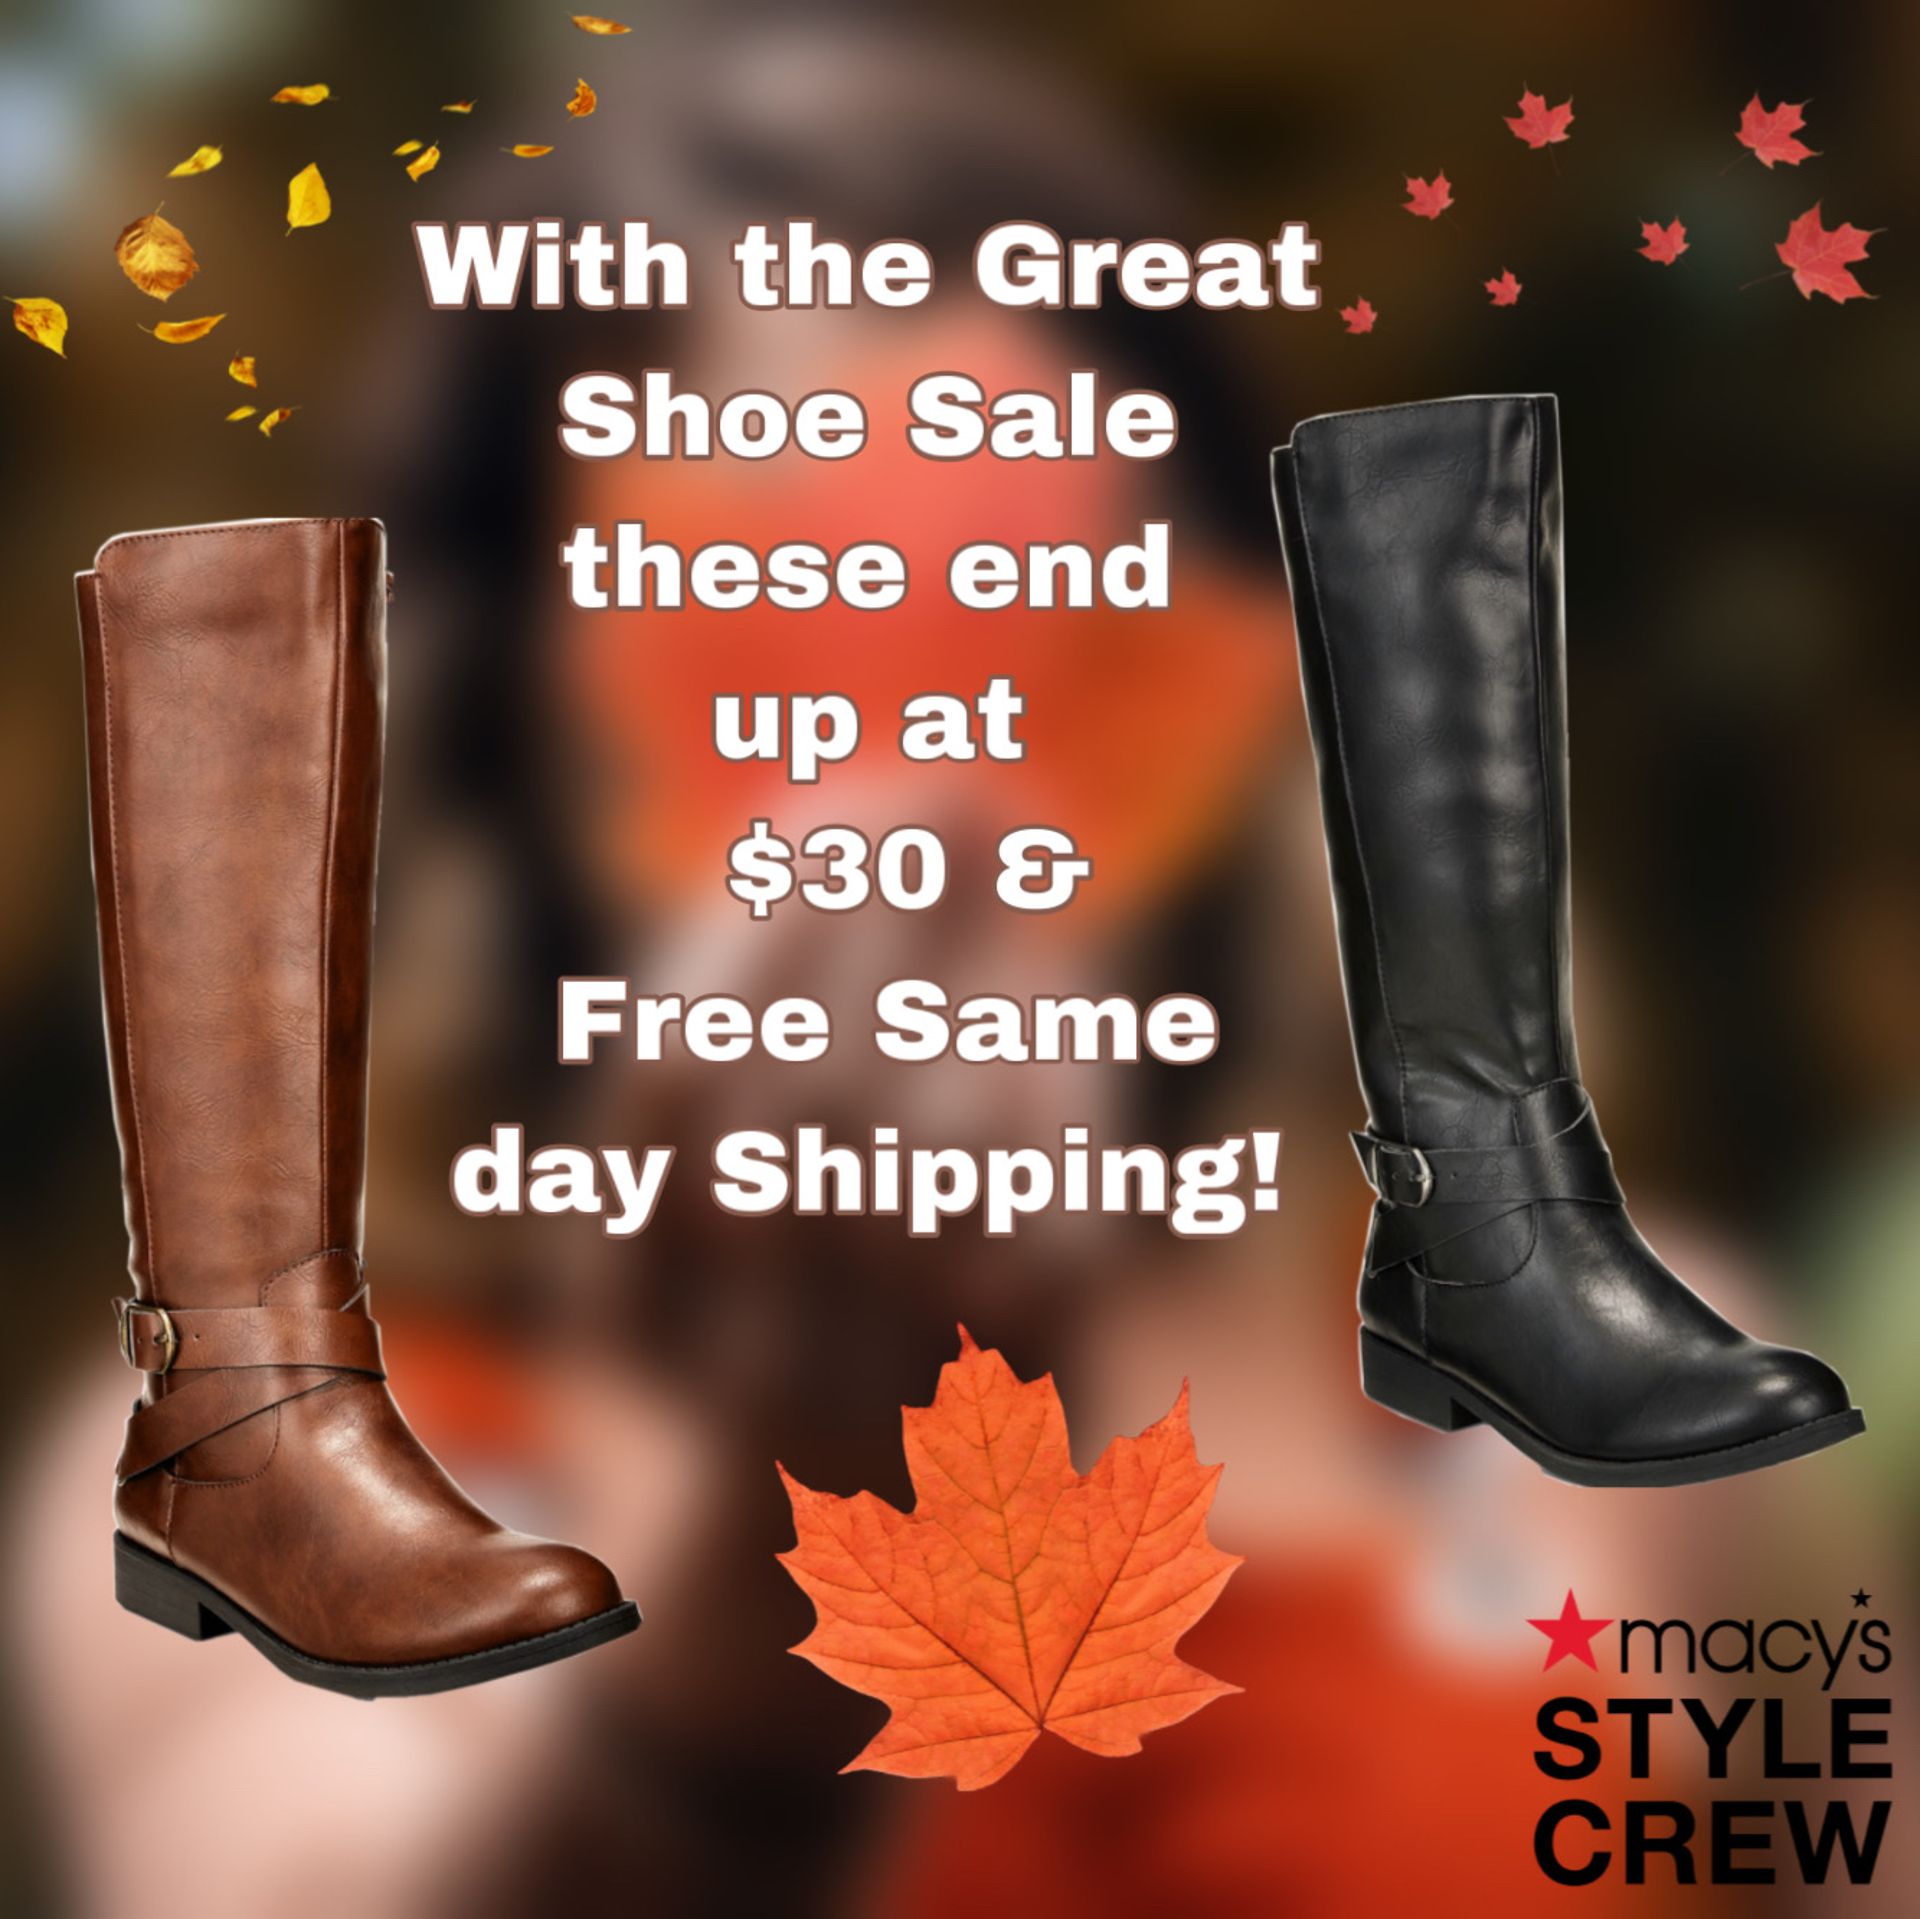 macy's boot sale buy one get one free